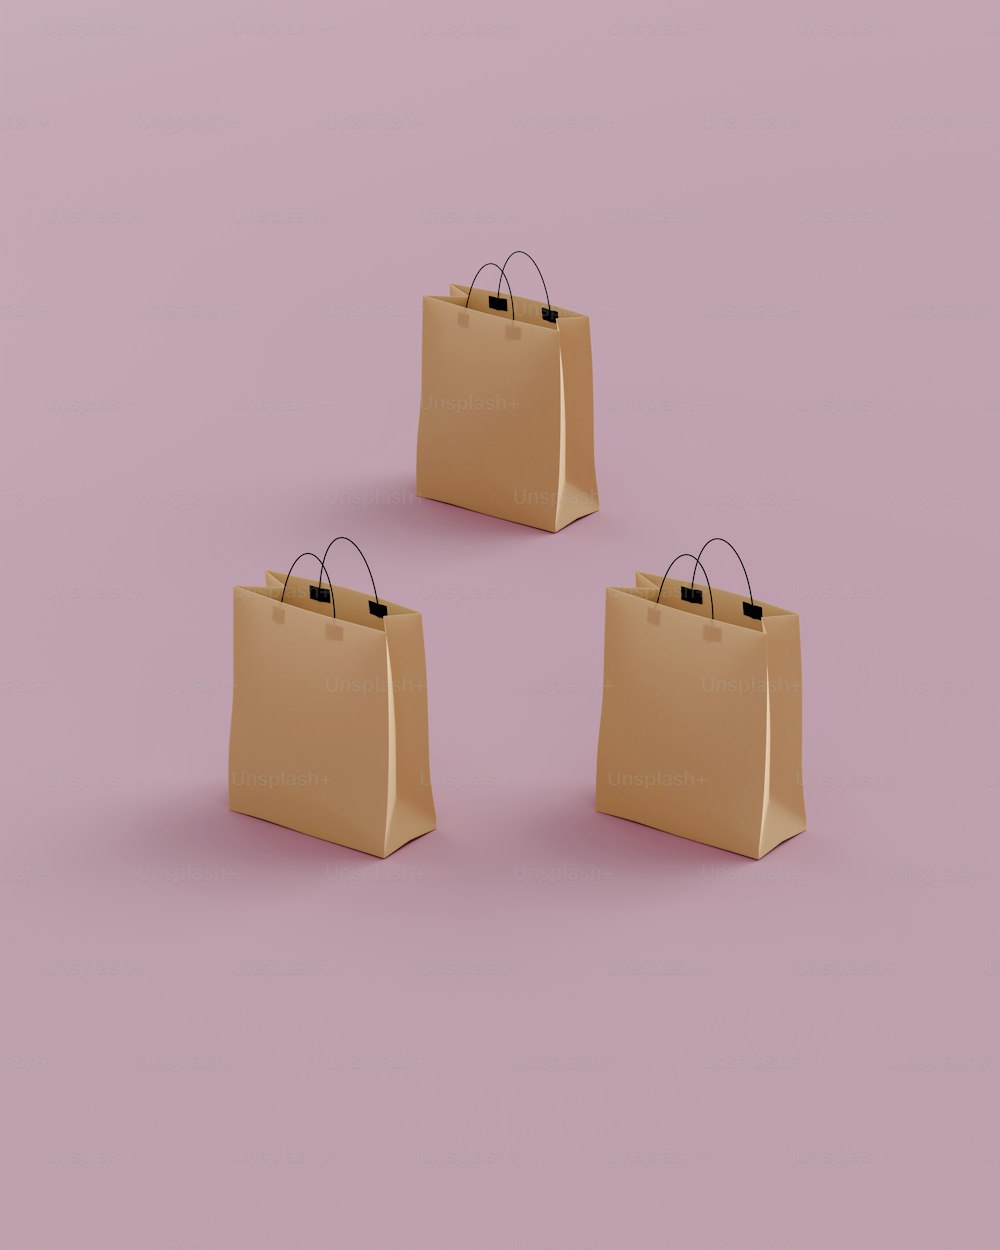 three brown shopping bags on a pink background